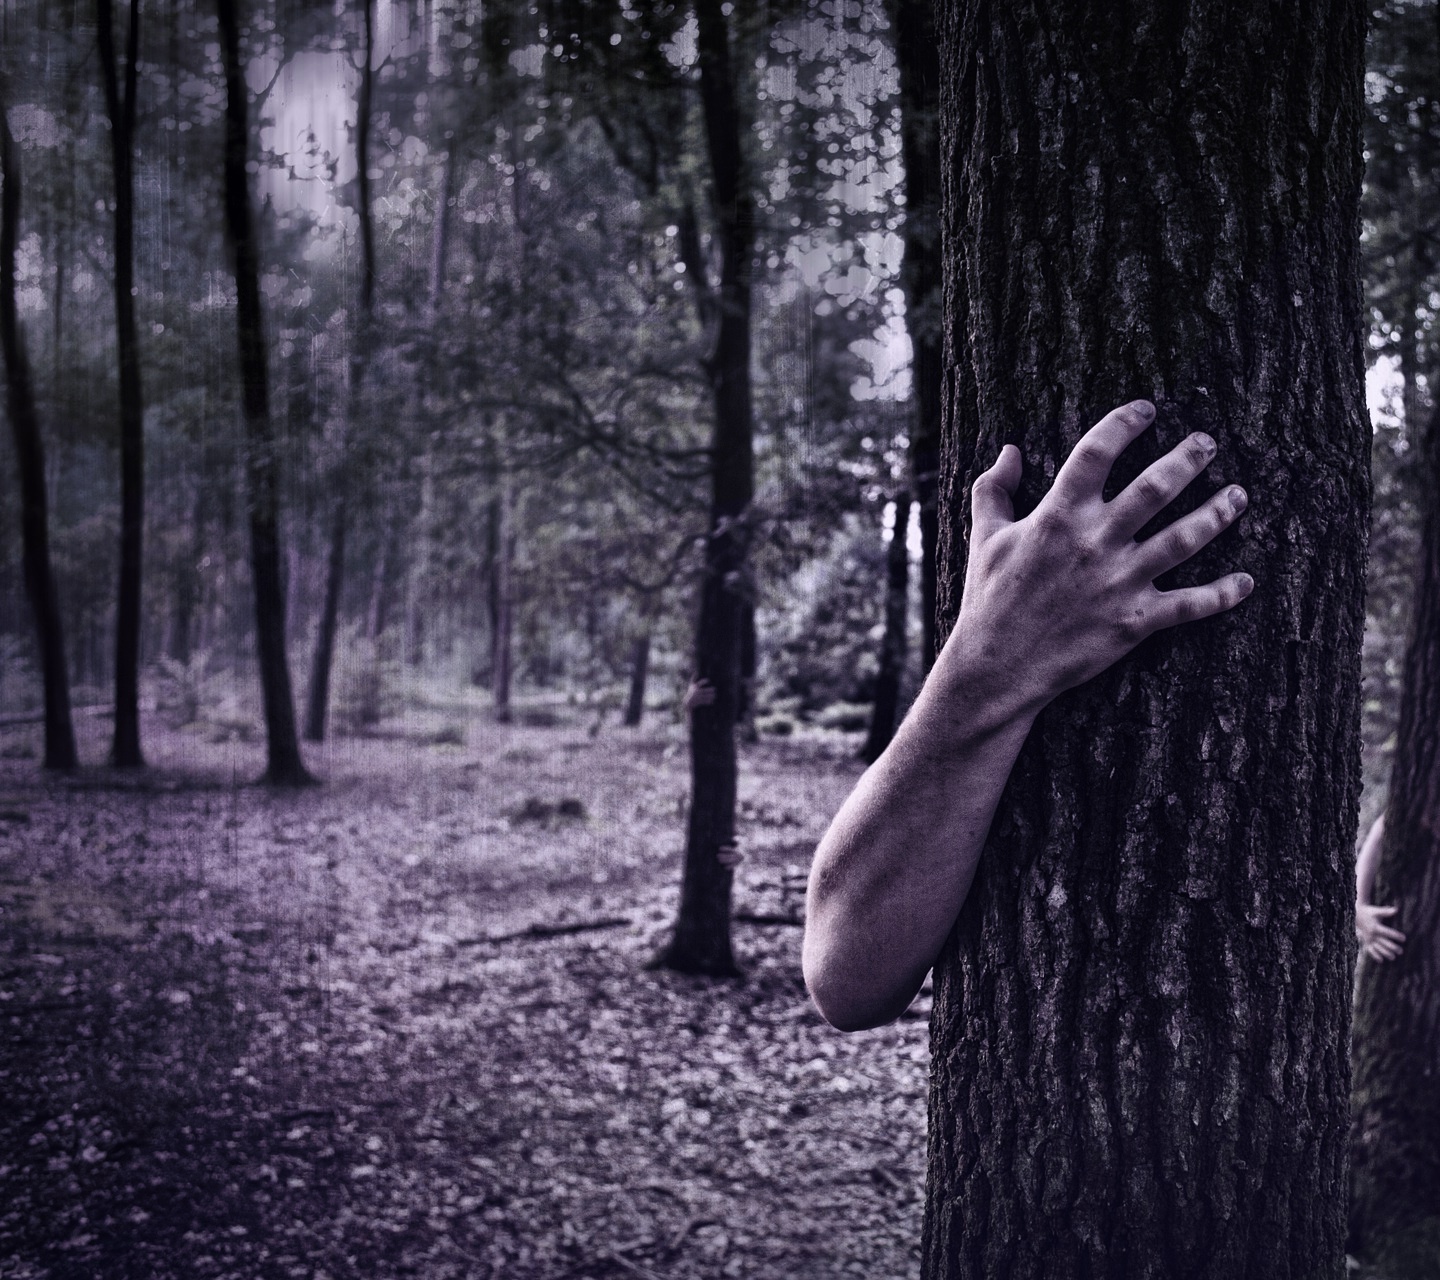 a dark/washed out forest scene with a purple tinge. In foreground a tree trunk close up a sickly looking 'zombie' arm reaches around from behind.